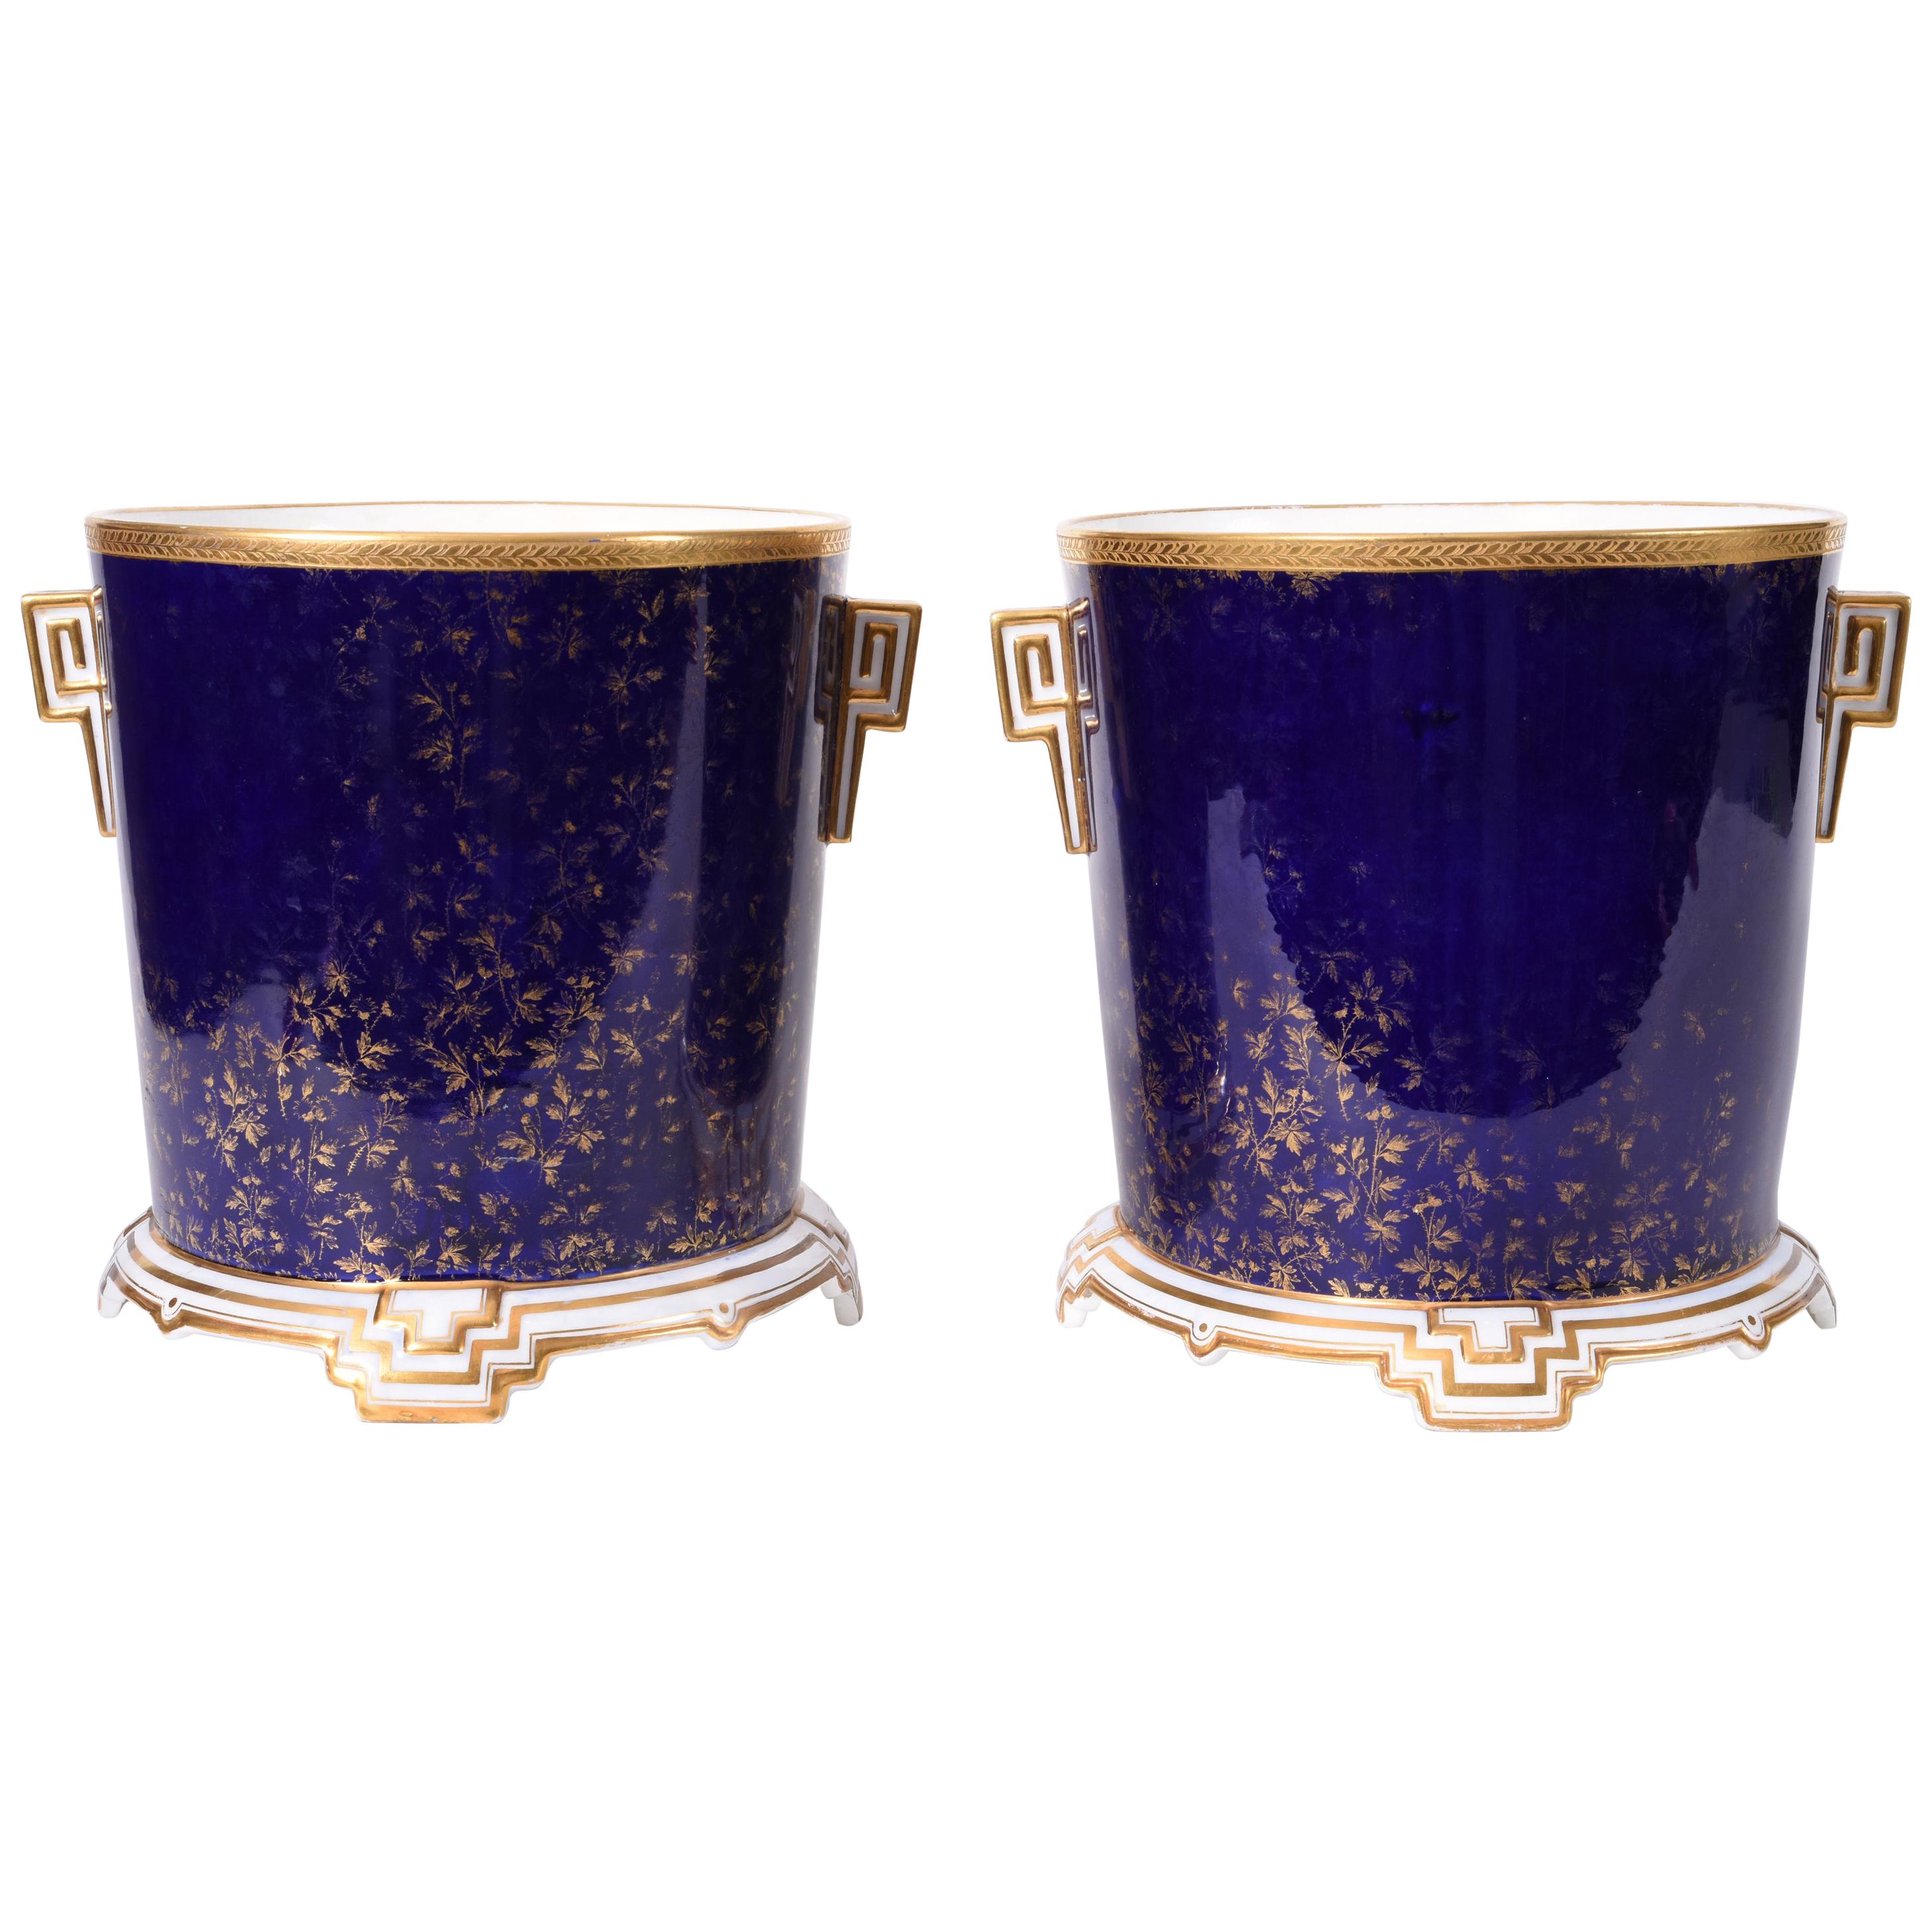 Late 19th Century Matching Pair of English Wedgwood Wine Coolers